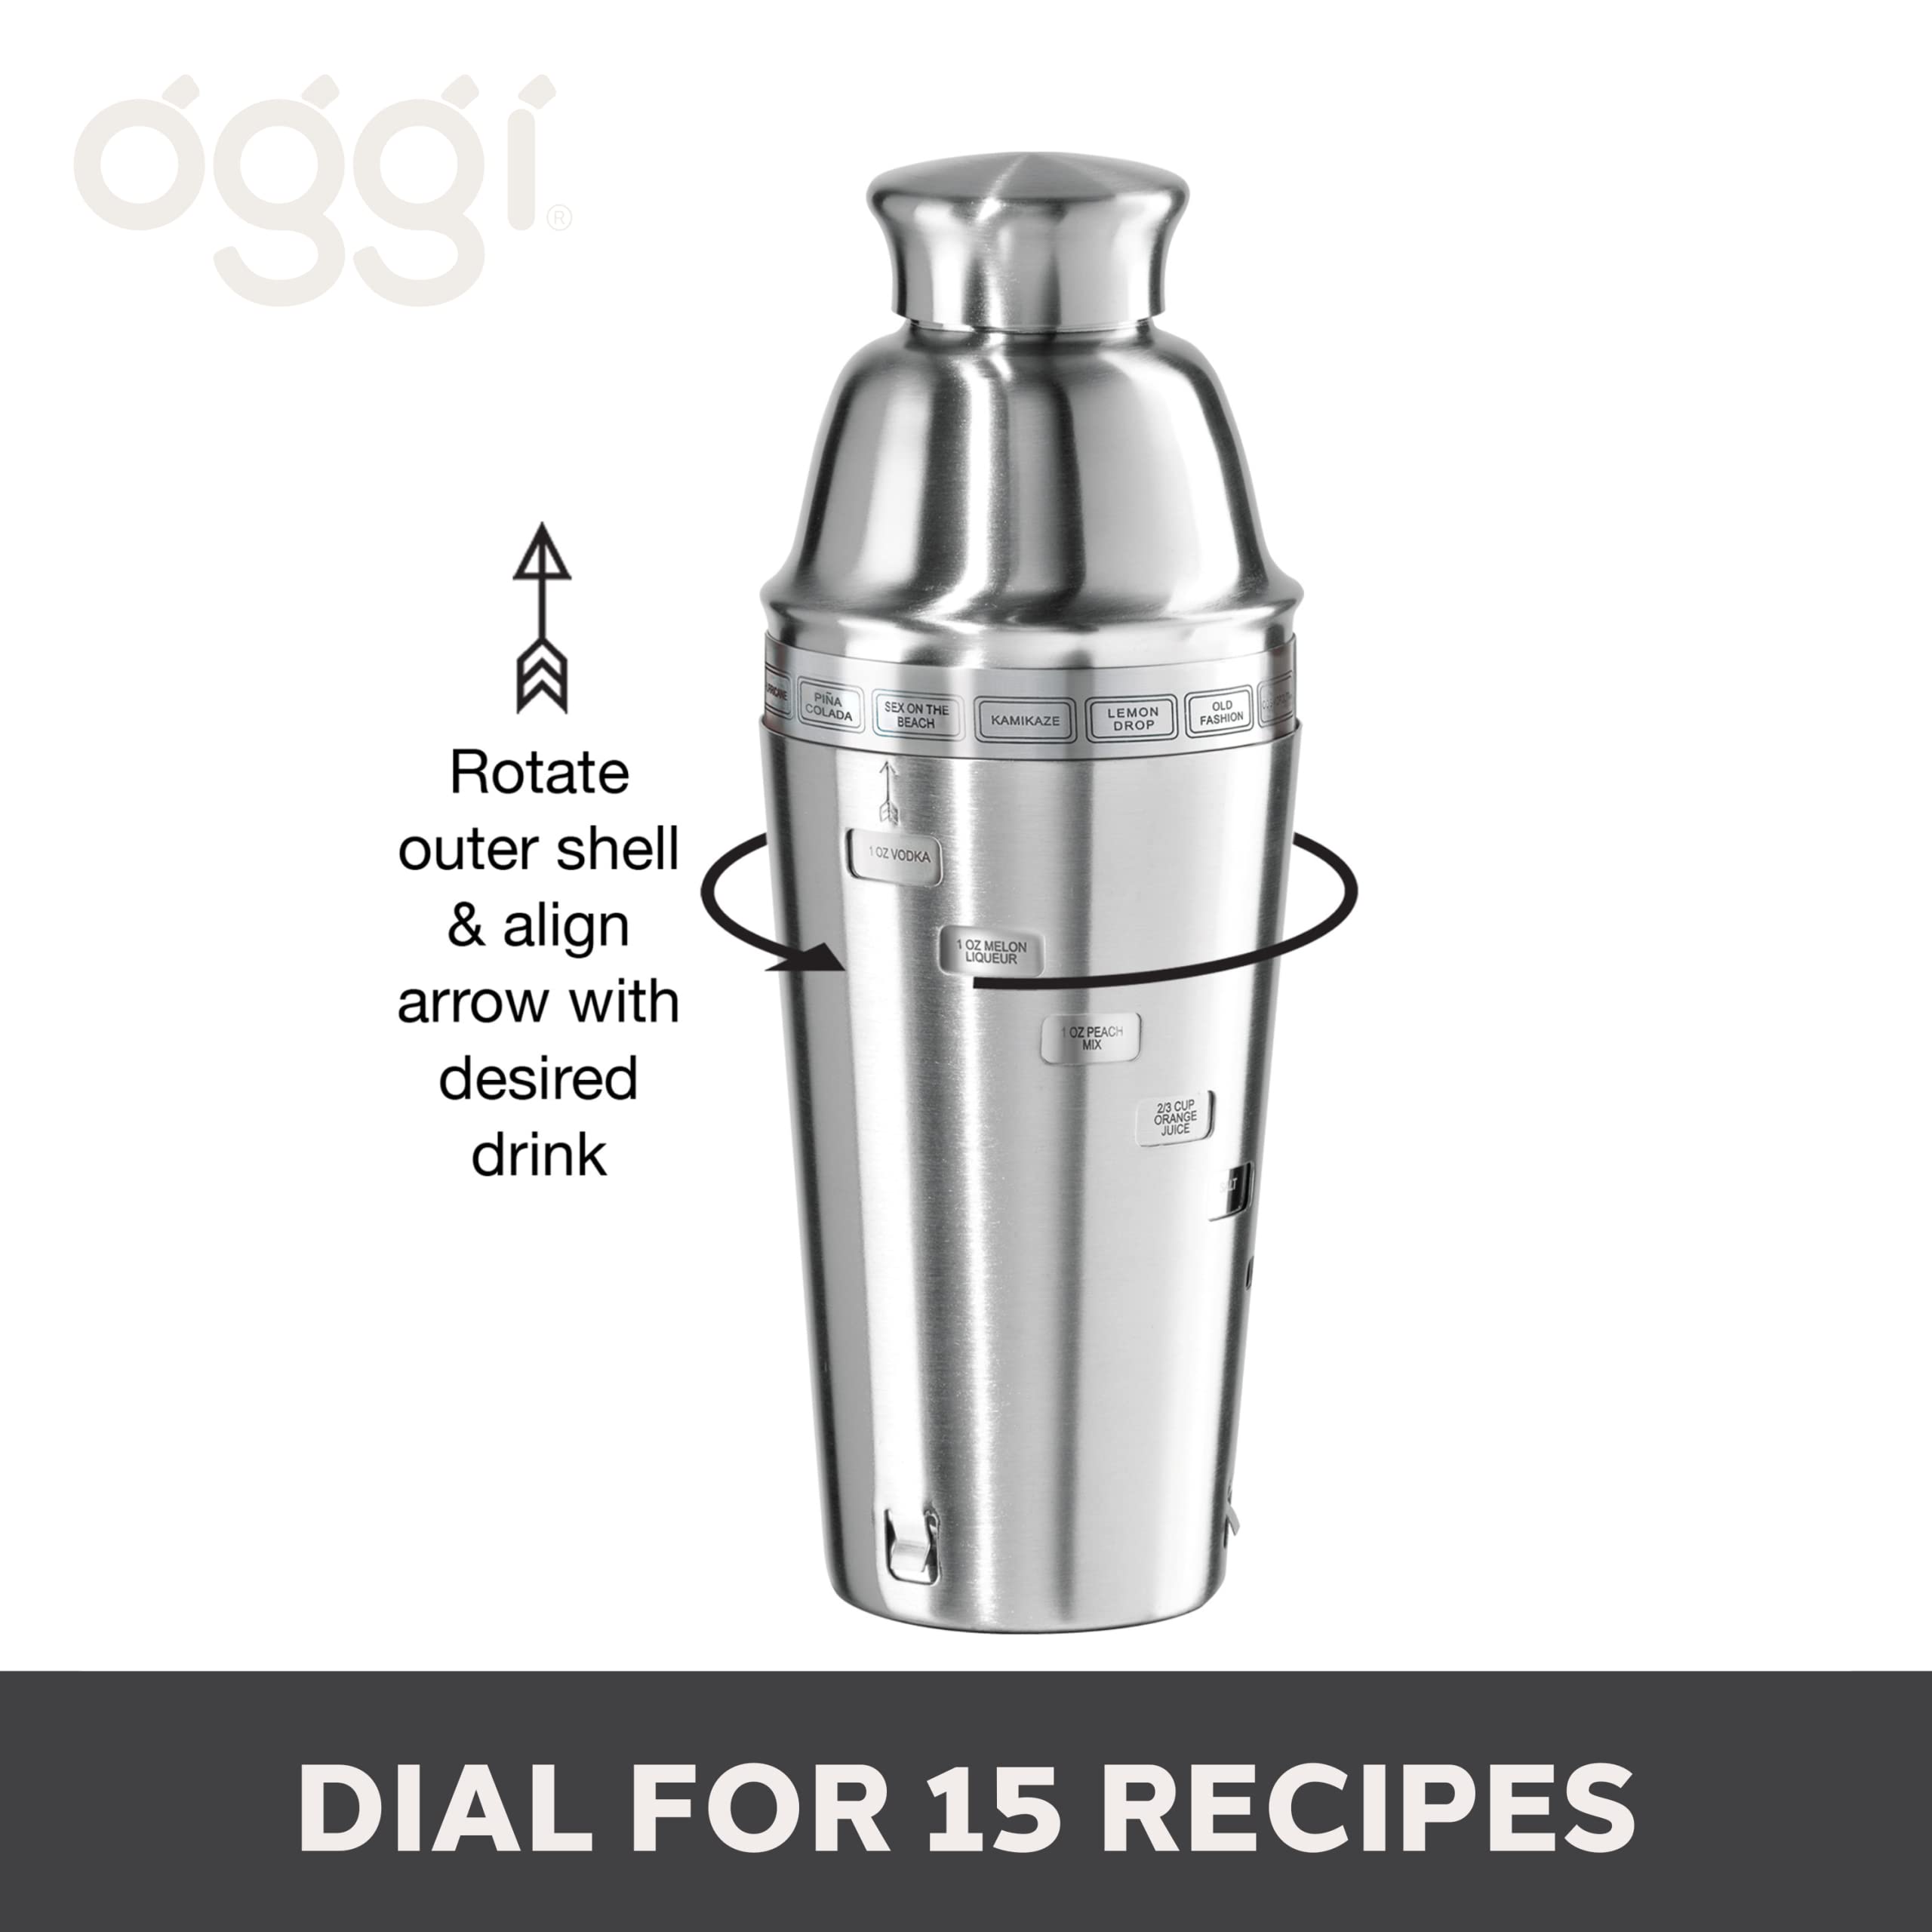 OGGI Dial A Drink Cocktail Shaker - Stainless Steel, 15 Recipes, Built in Strainer, 34 oz - The Original and Only Dial A Drink - Ideal Home Bar Drink Mixer, Bartender Kit, Essential Bar Accessories